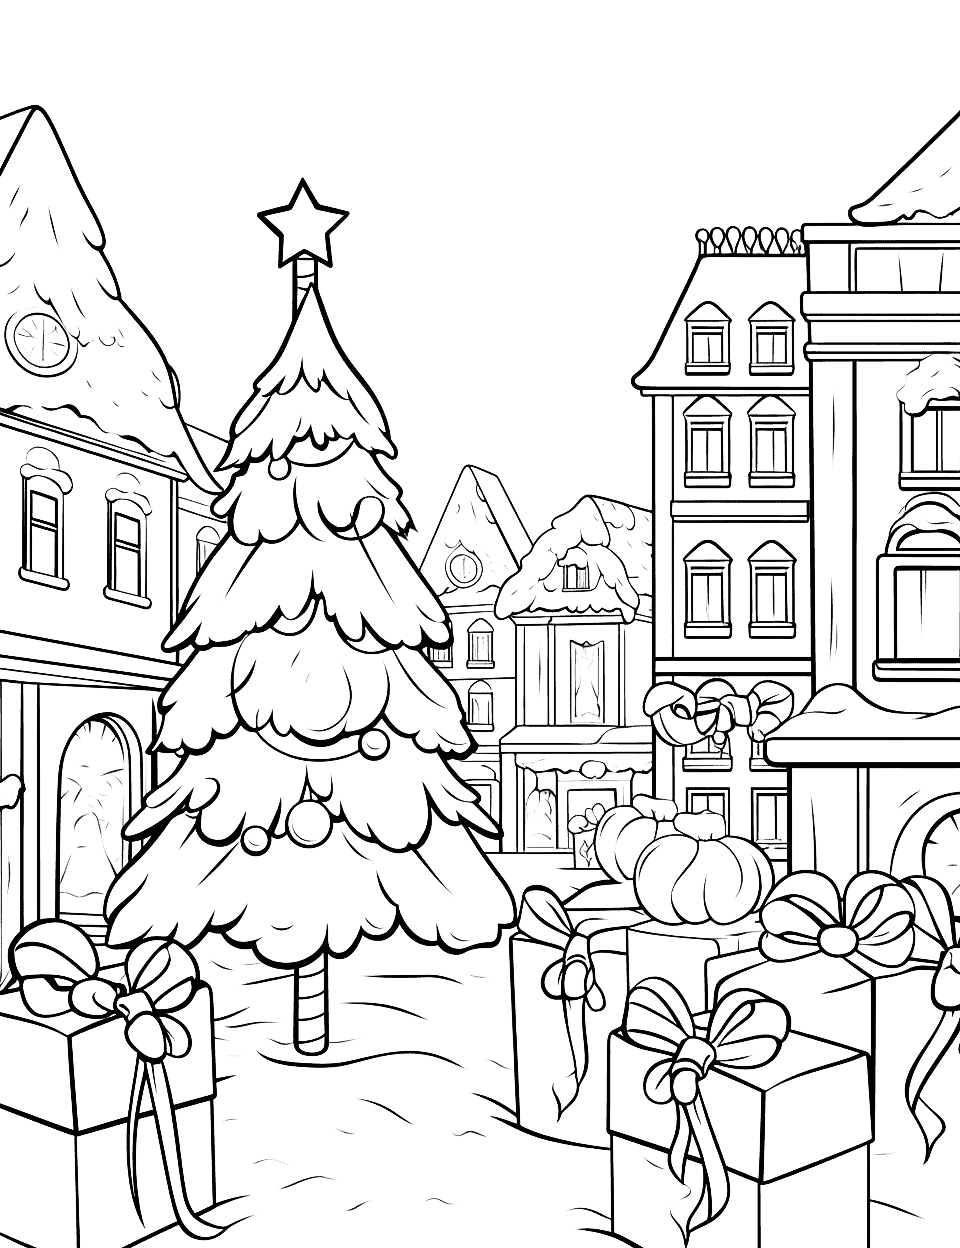 Christmas Tree in Town Coloring Page - Christmas tree decorated with gifts in the middle of a town